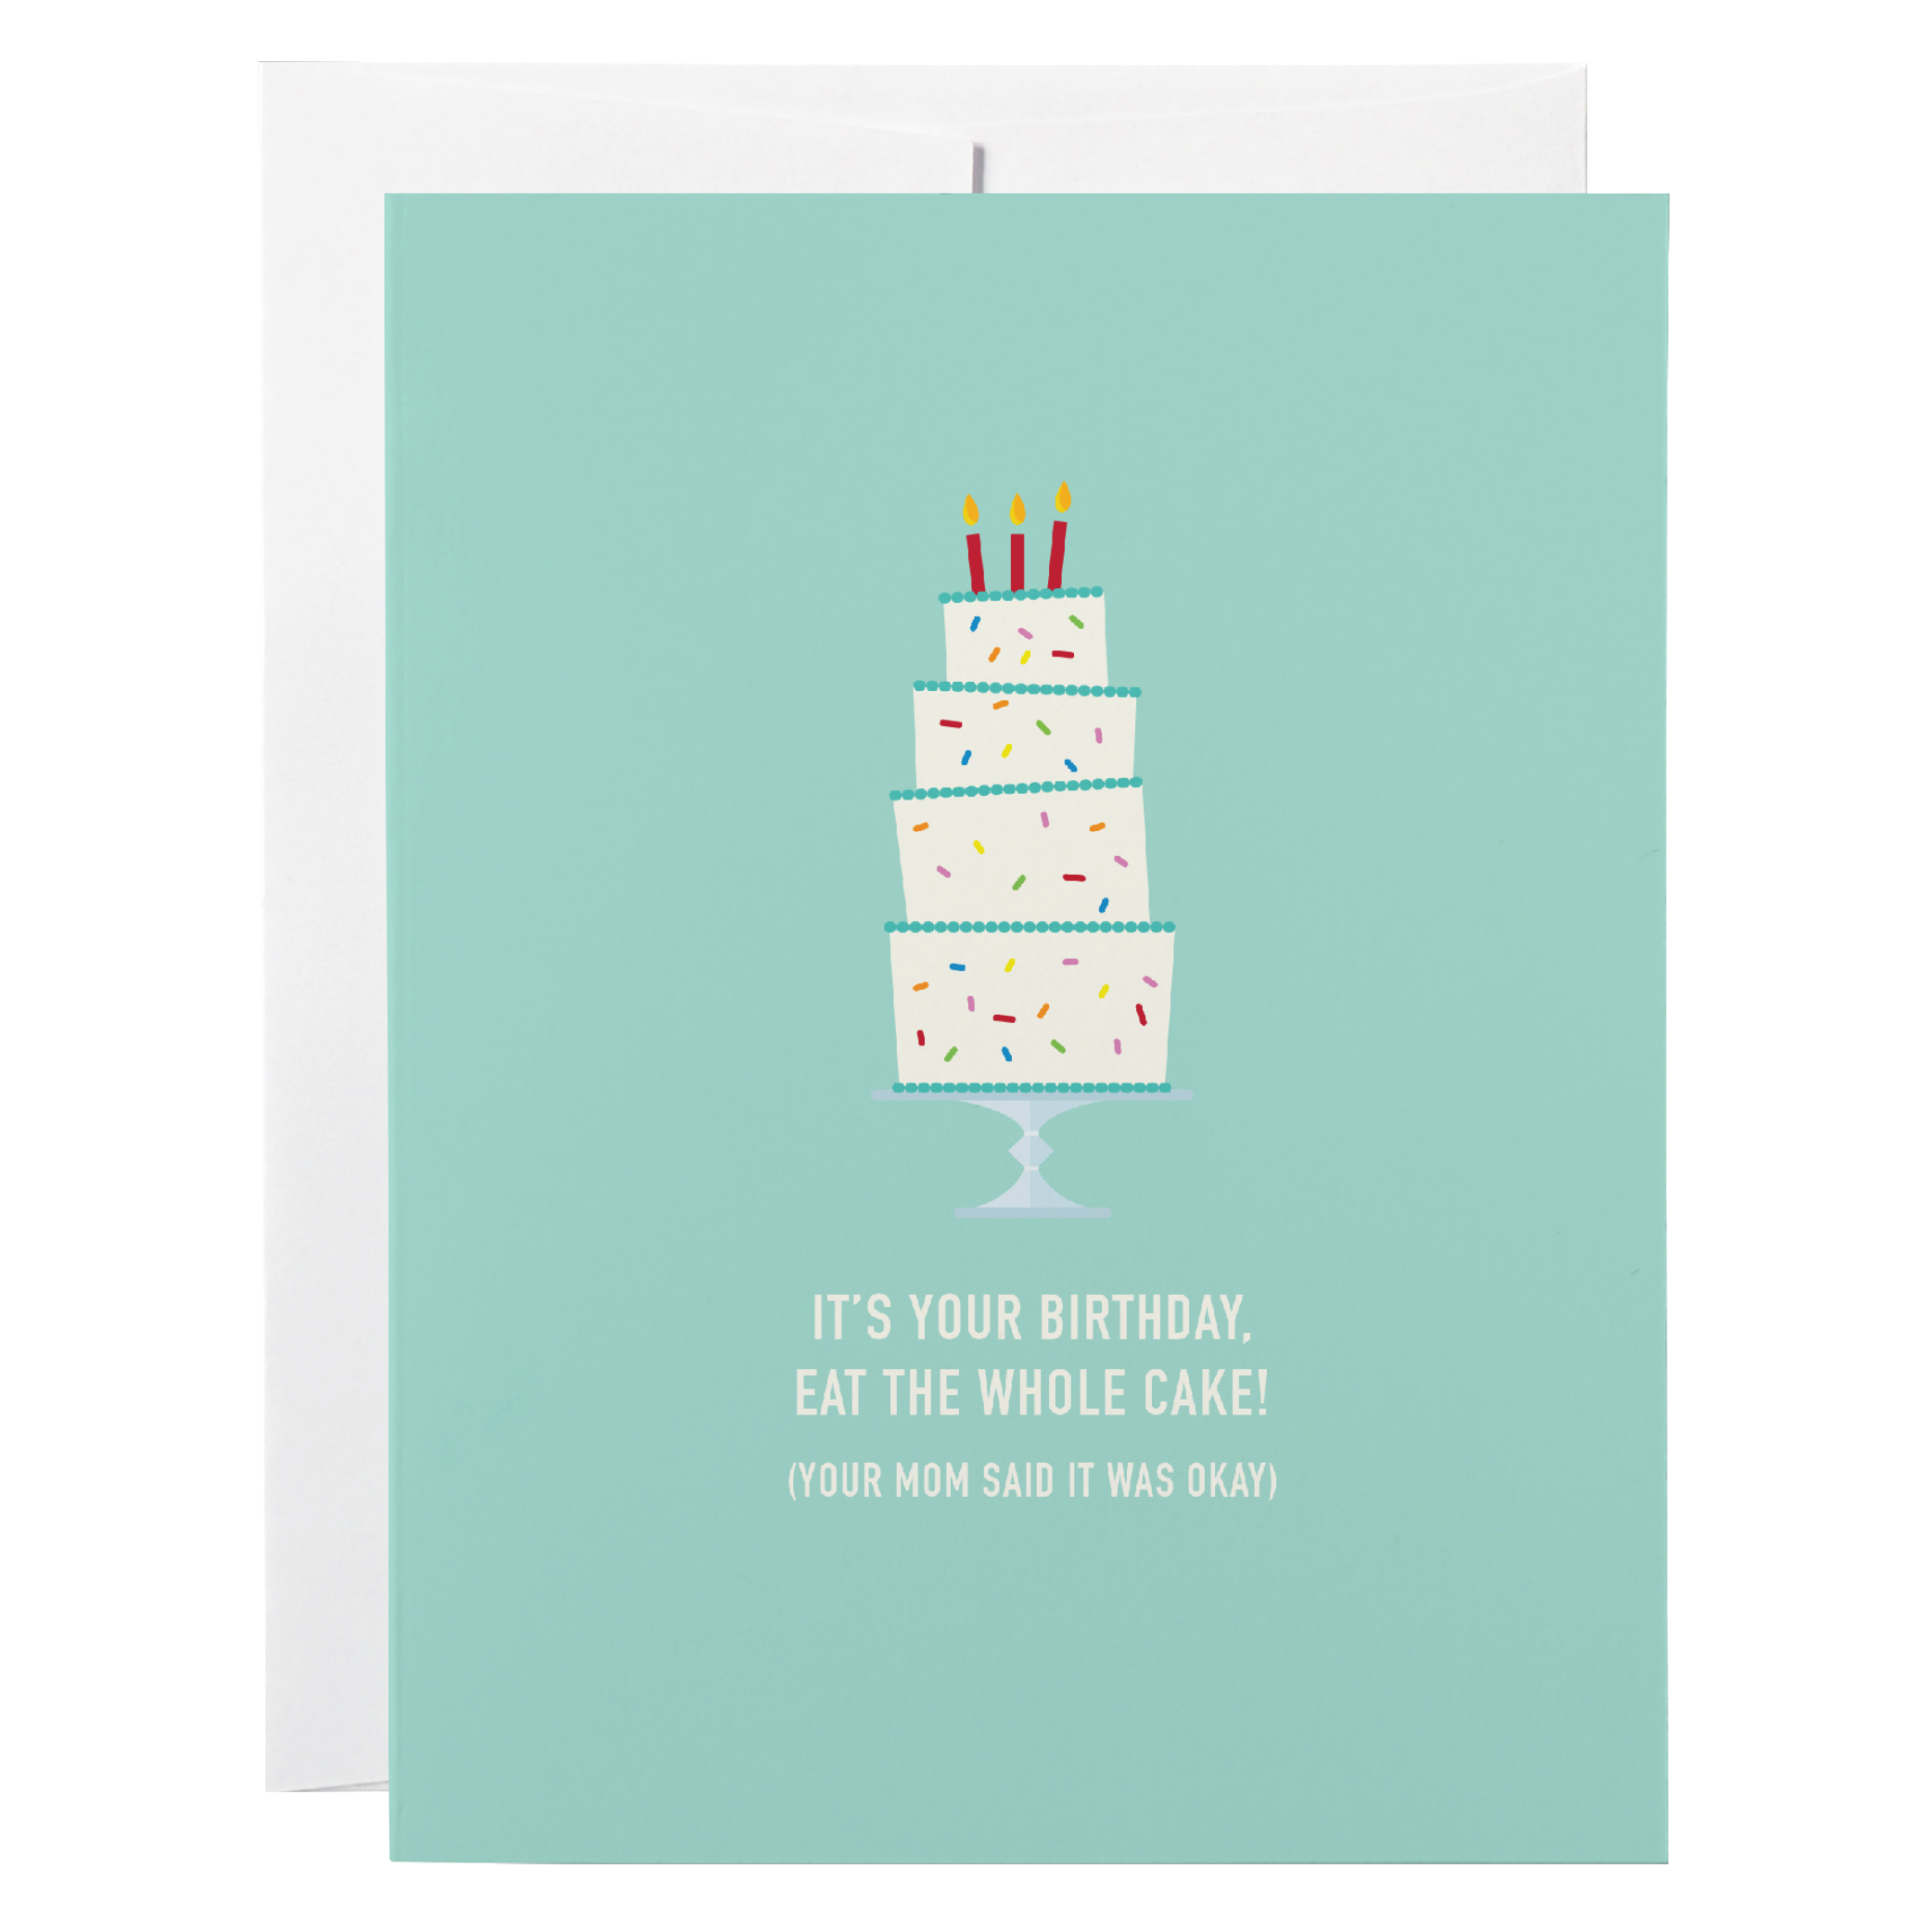 Classy Cards Greeting Card - Tall Cake